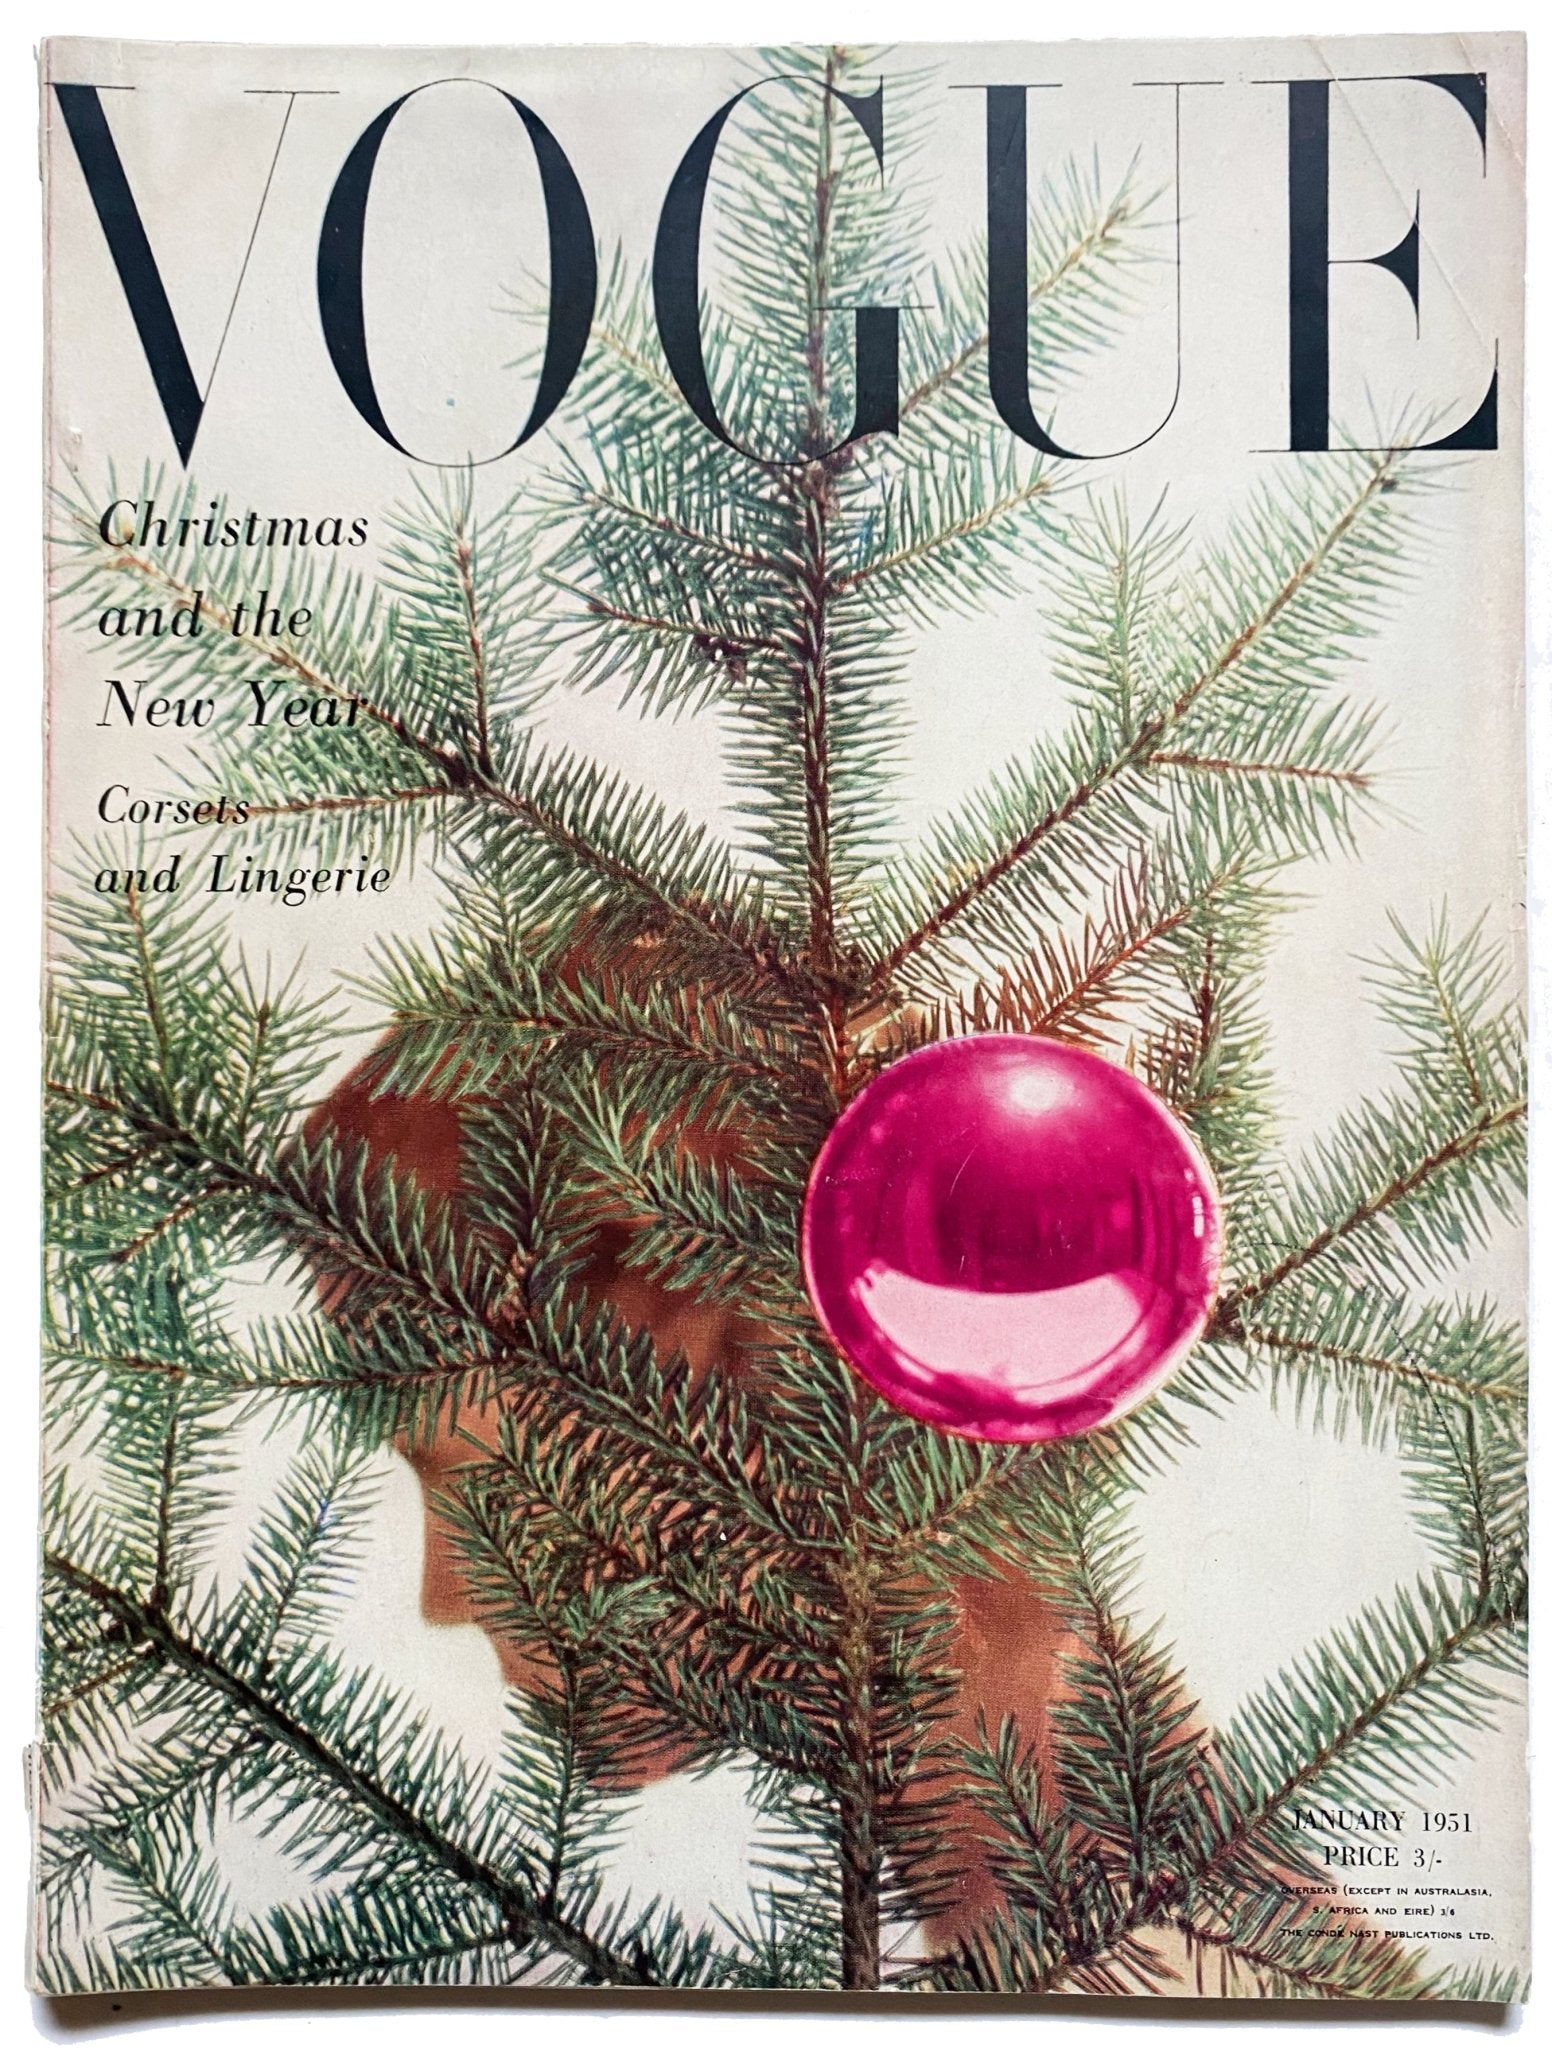 1951 VOGUE Magazine - "Christmas and The New Year" - style - CHNGR